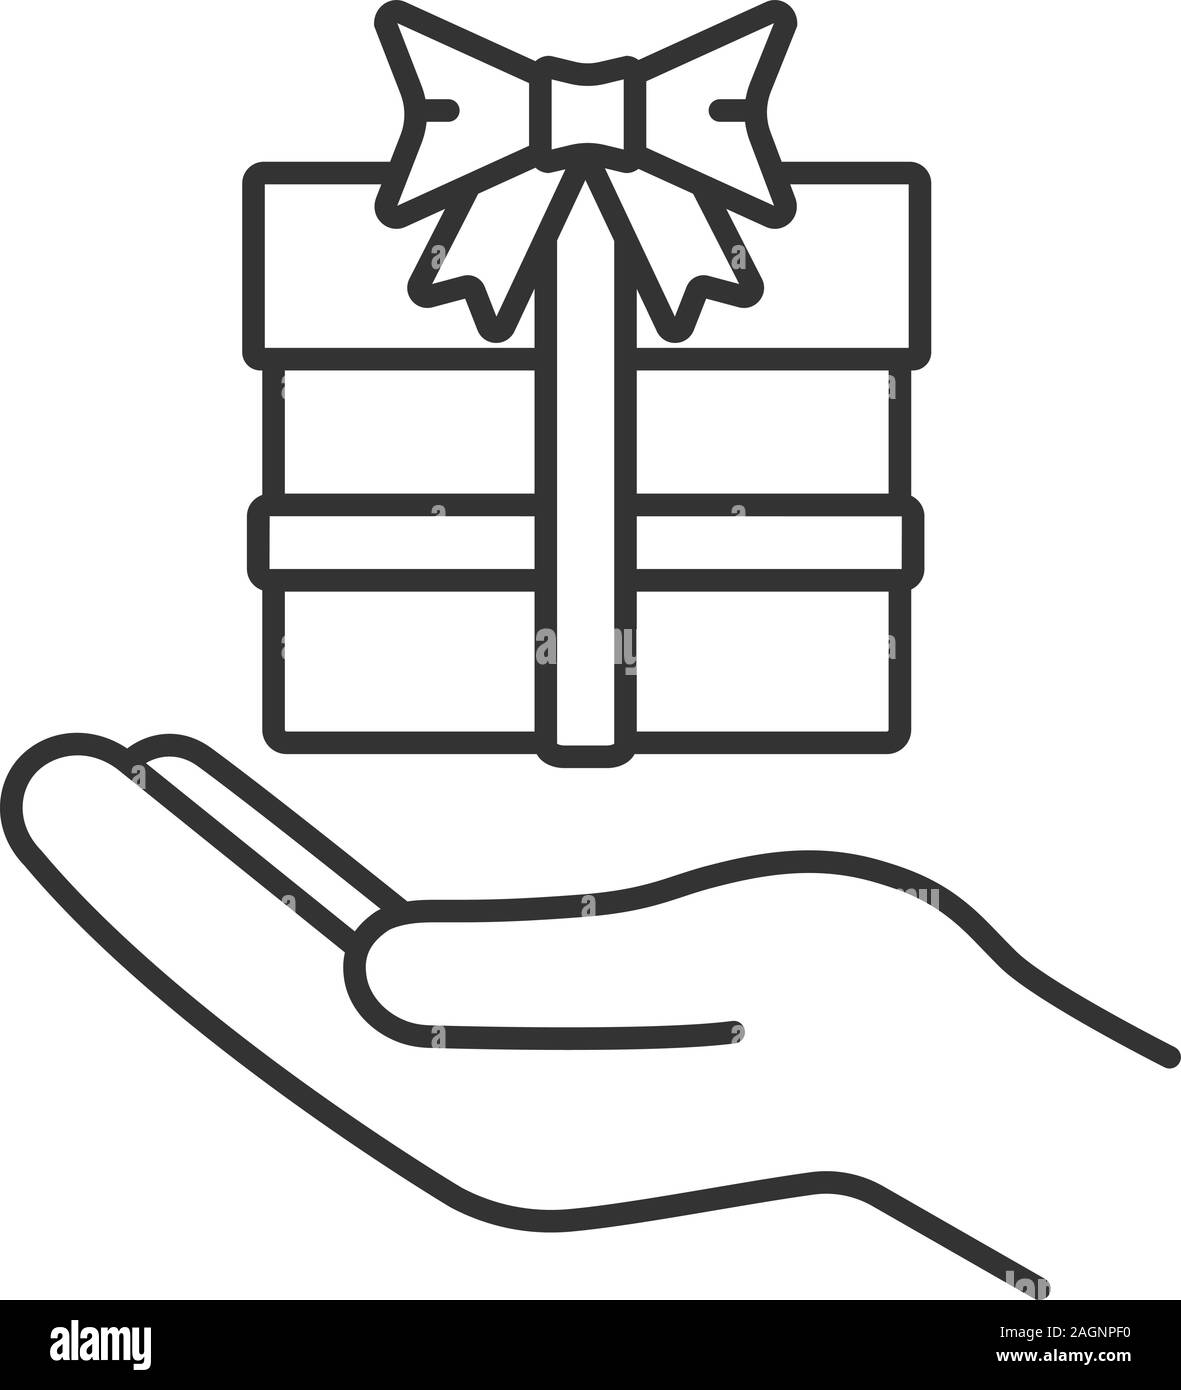 https://c8.alamy.com/comp/2AGNPF0/present-linear-icon-open-hand-with-gift-box-thin-line-illustration-giving-getting-gift-contour-symbol-contour-symbol-vector-isolated-outline-dr-2AGNPF0.jpg